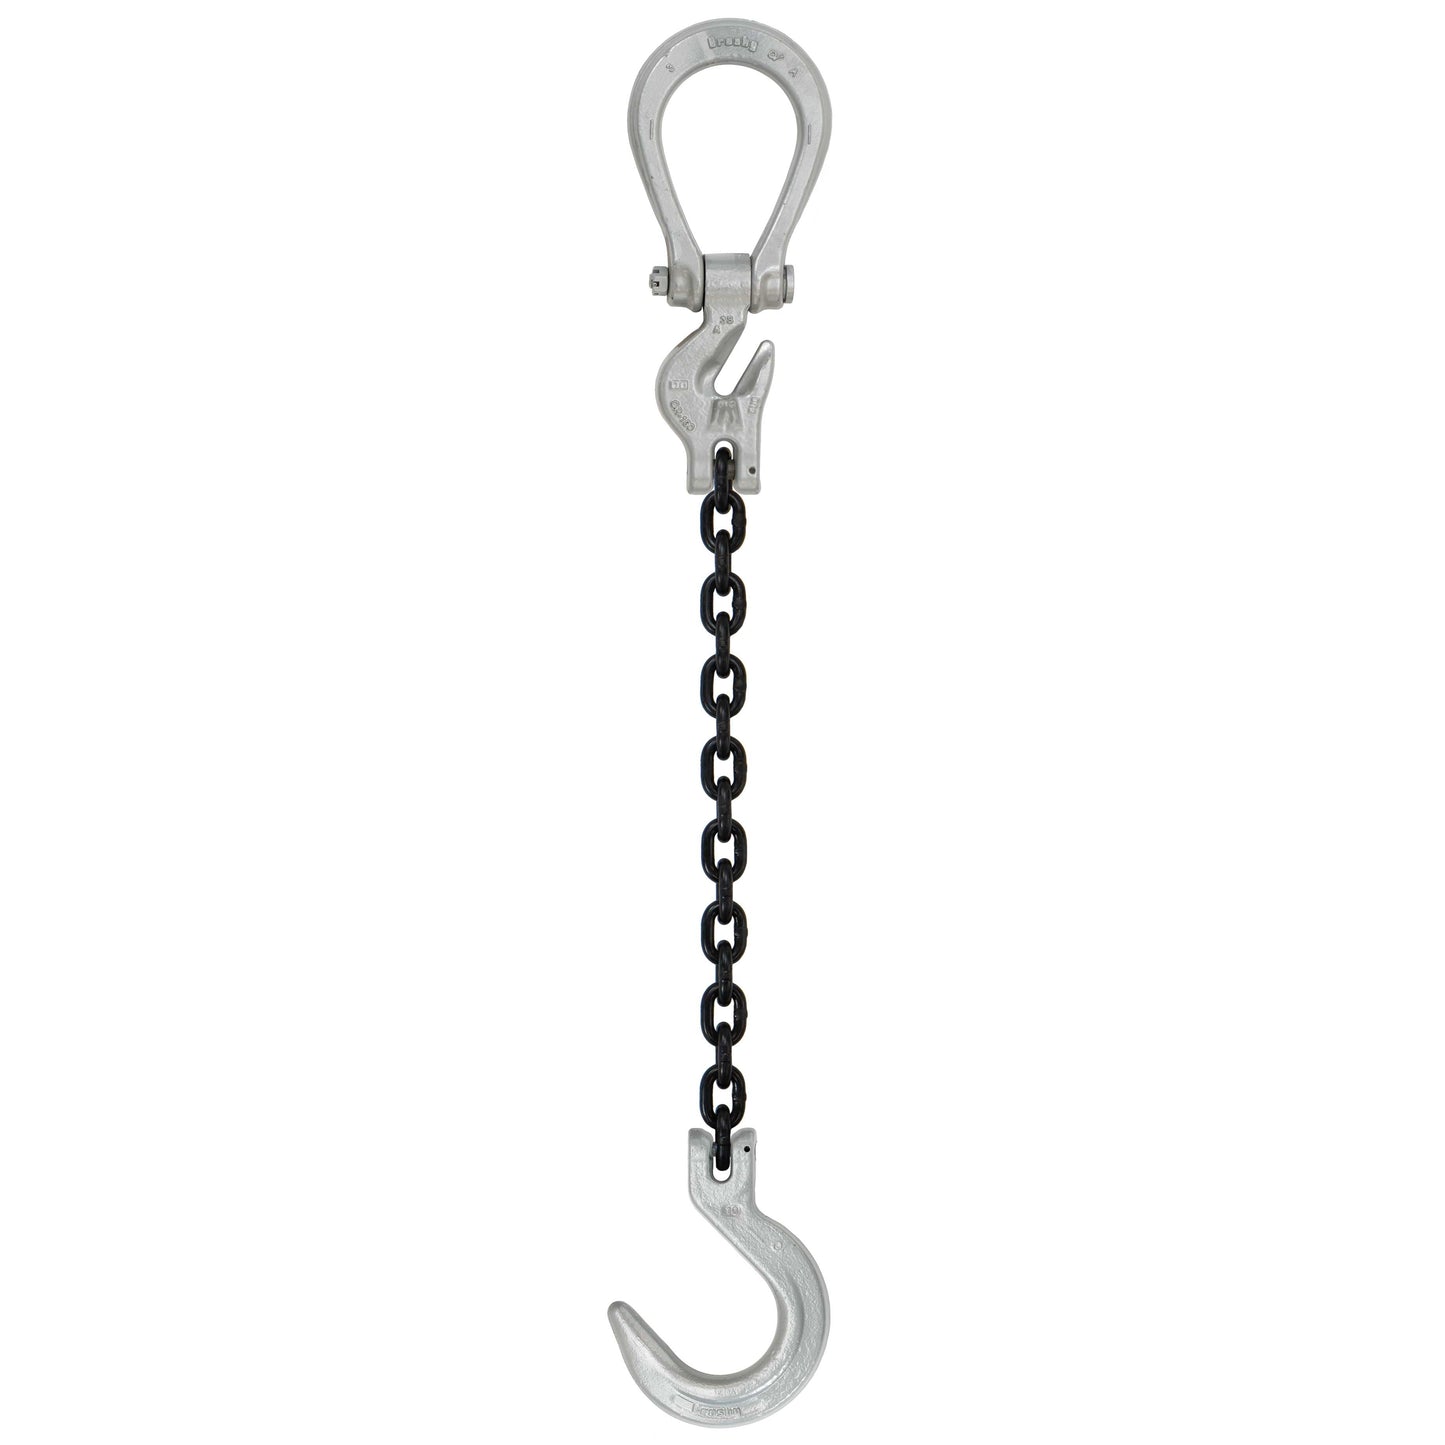 516 inch x 5 foot Domestic Adjustable Single Leg Chain Sling w Crosby Foundry Hook Grade 100 image 1 of 2